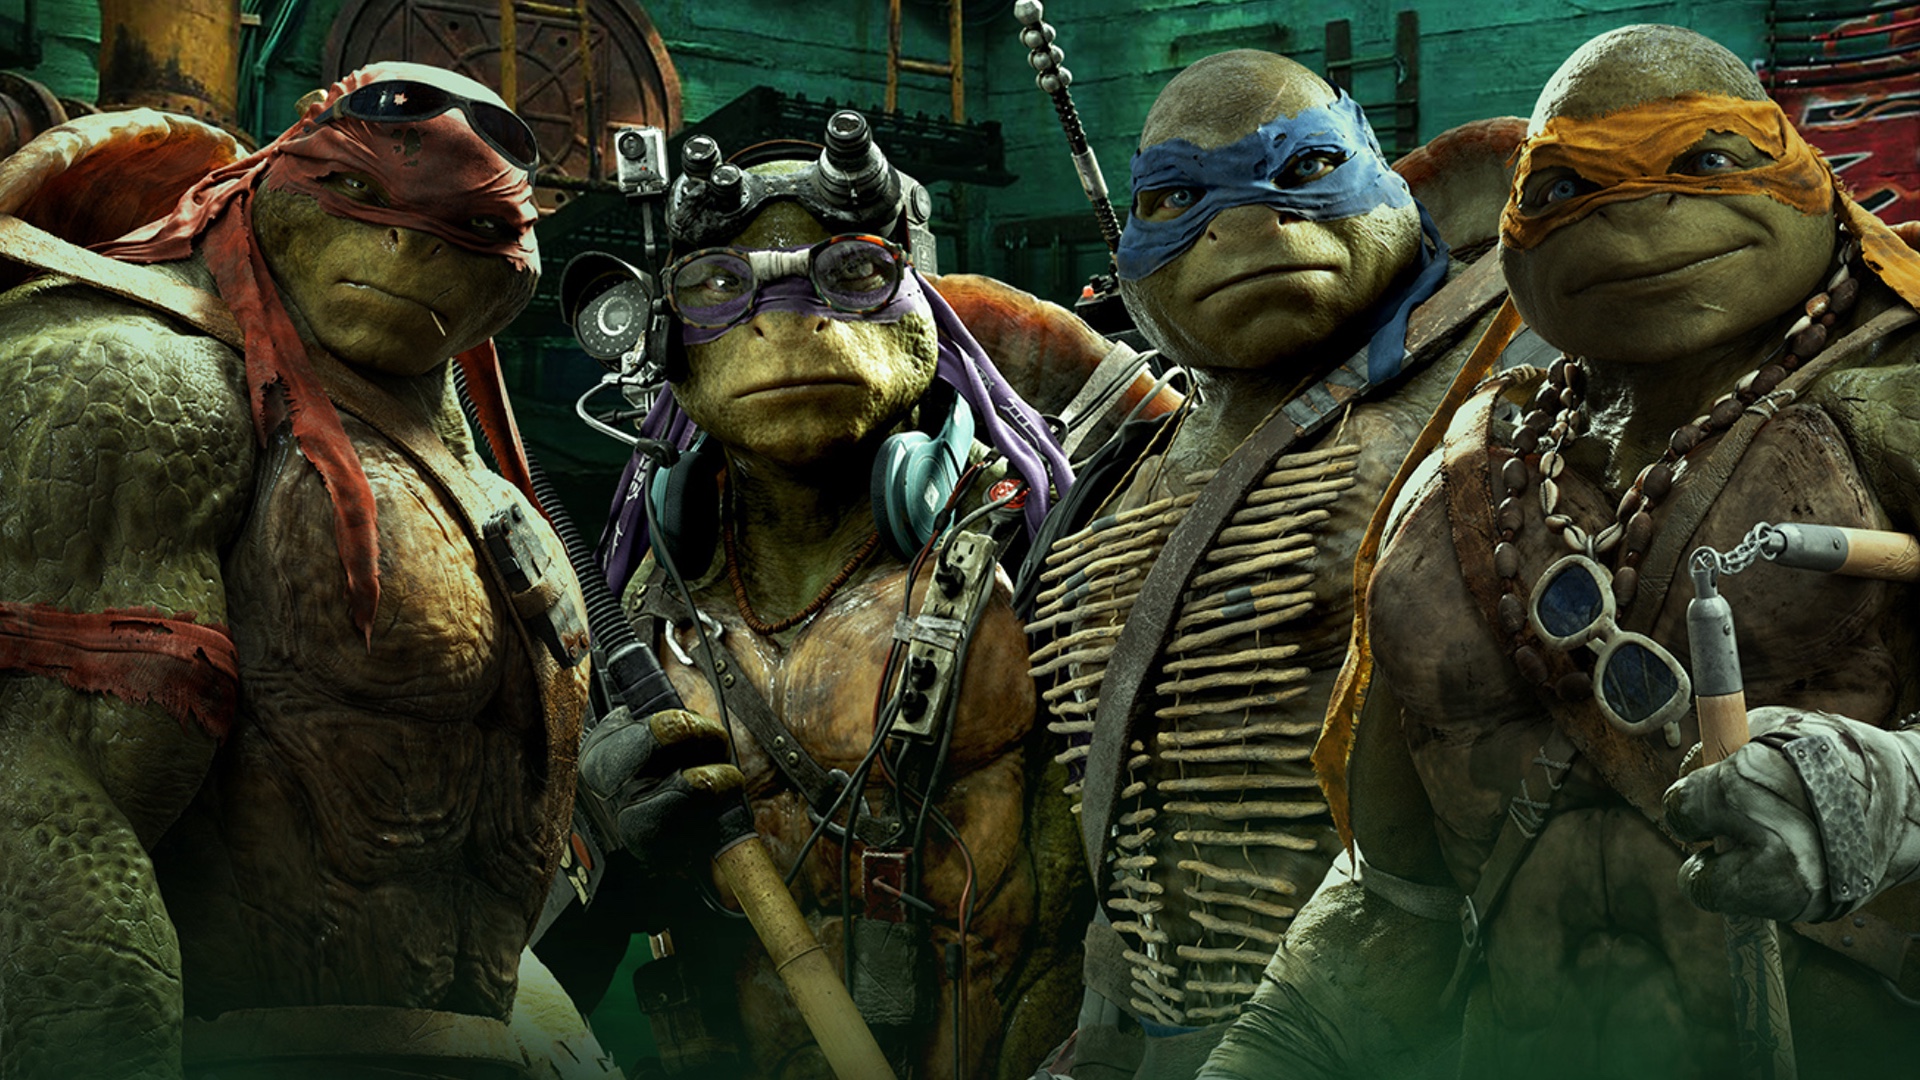 TMNT image from PARAMOUNT